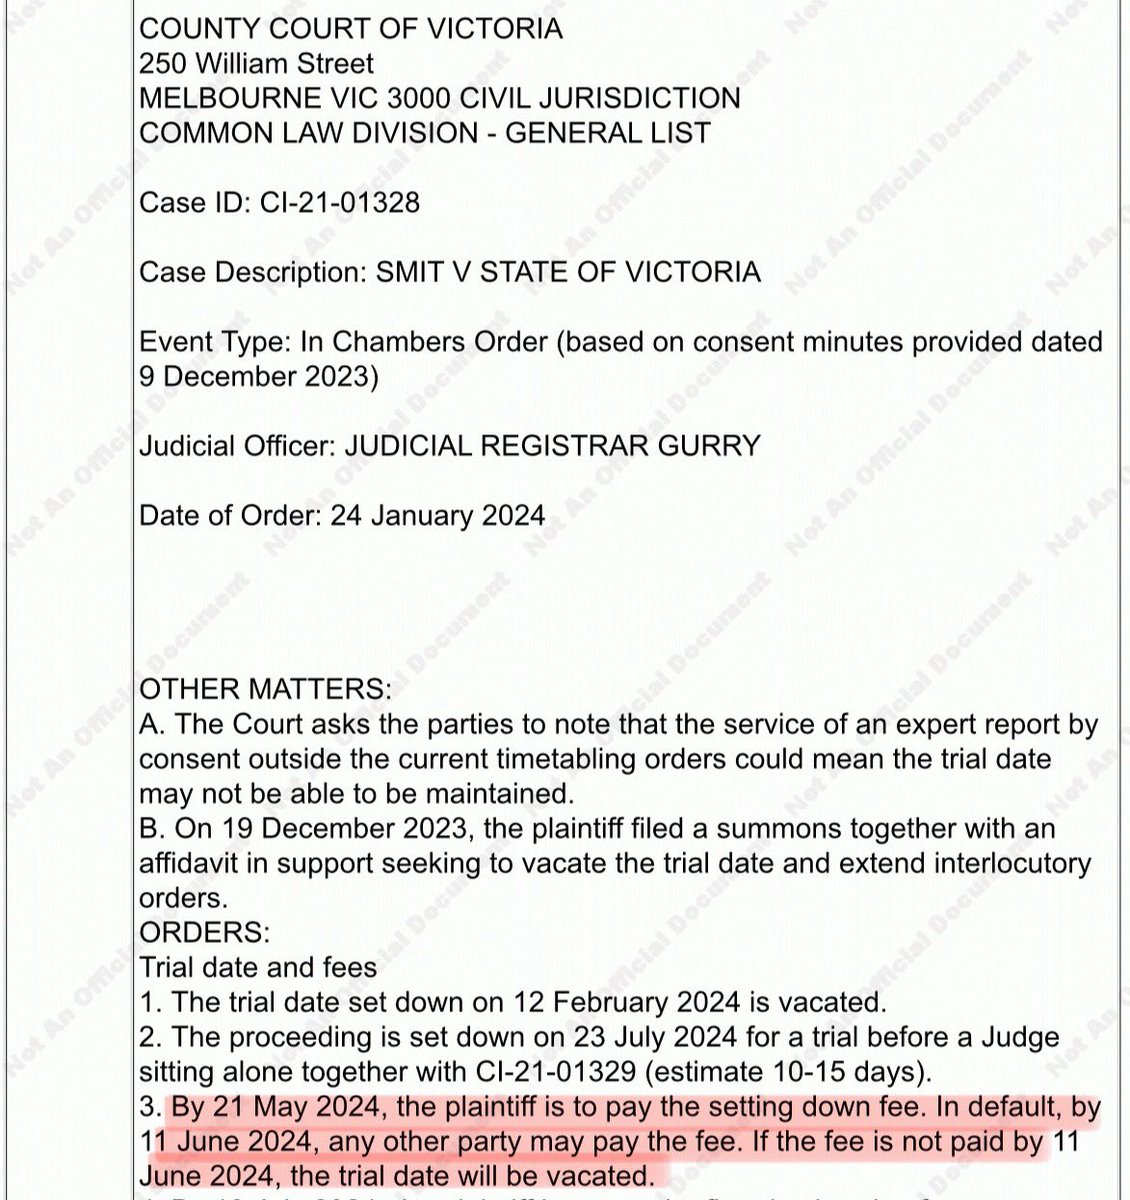 Will Monica Smit’s lawsuit against VicPol be vacated for a THIRD TIME? It’s sure looking that way The anti lockdown activist hasn’t paid her setting down fee, due 21 May. I doubt VicPol will pay it for her so unless she pays by 11 June her trial will be vacated AGAIN